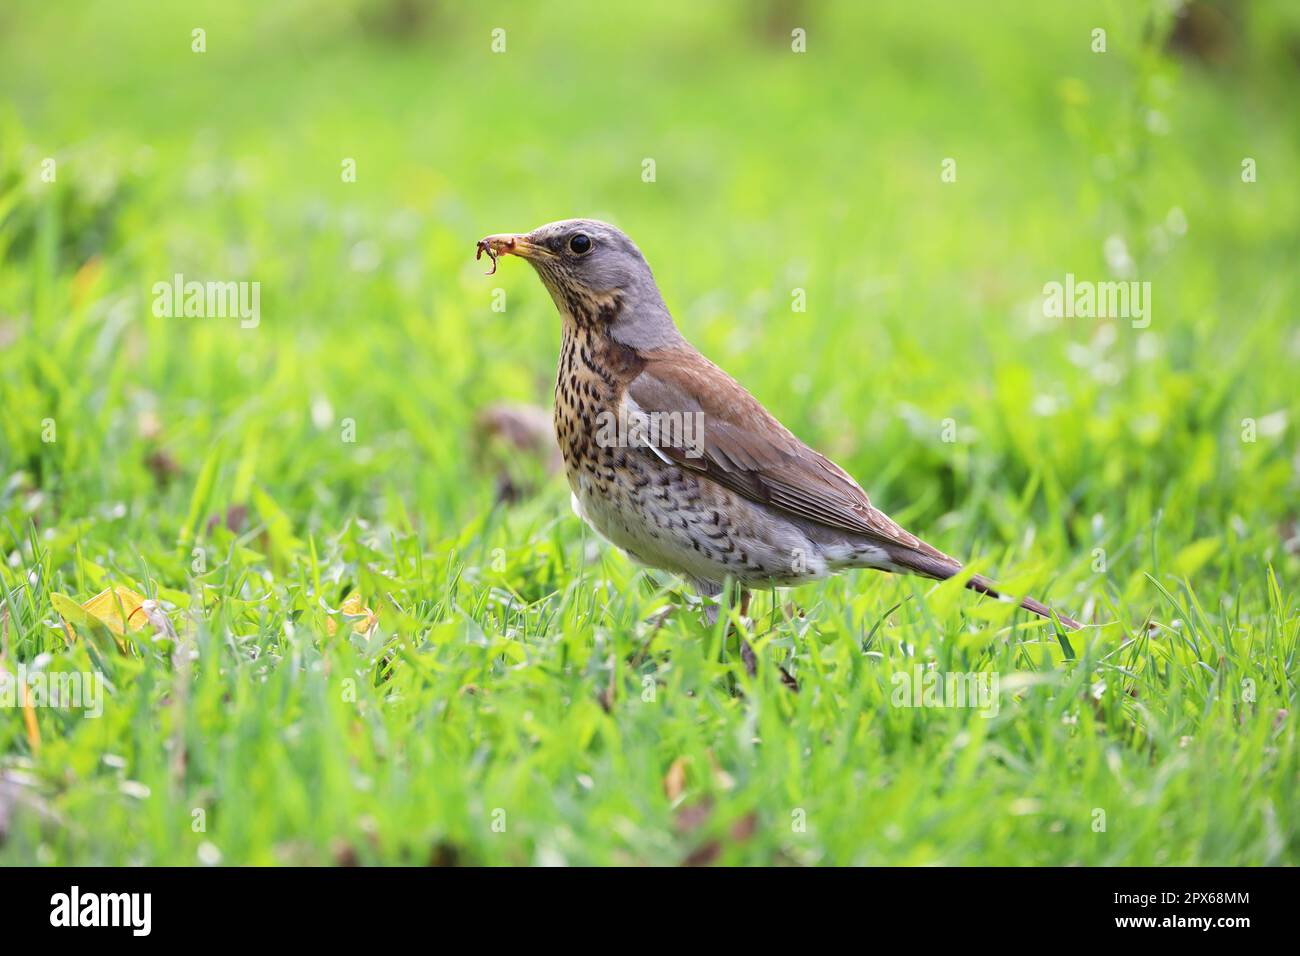 Young thrush bird looking for food in the green grass. Songbird in a spring season Stock Photo